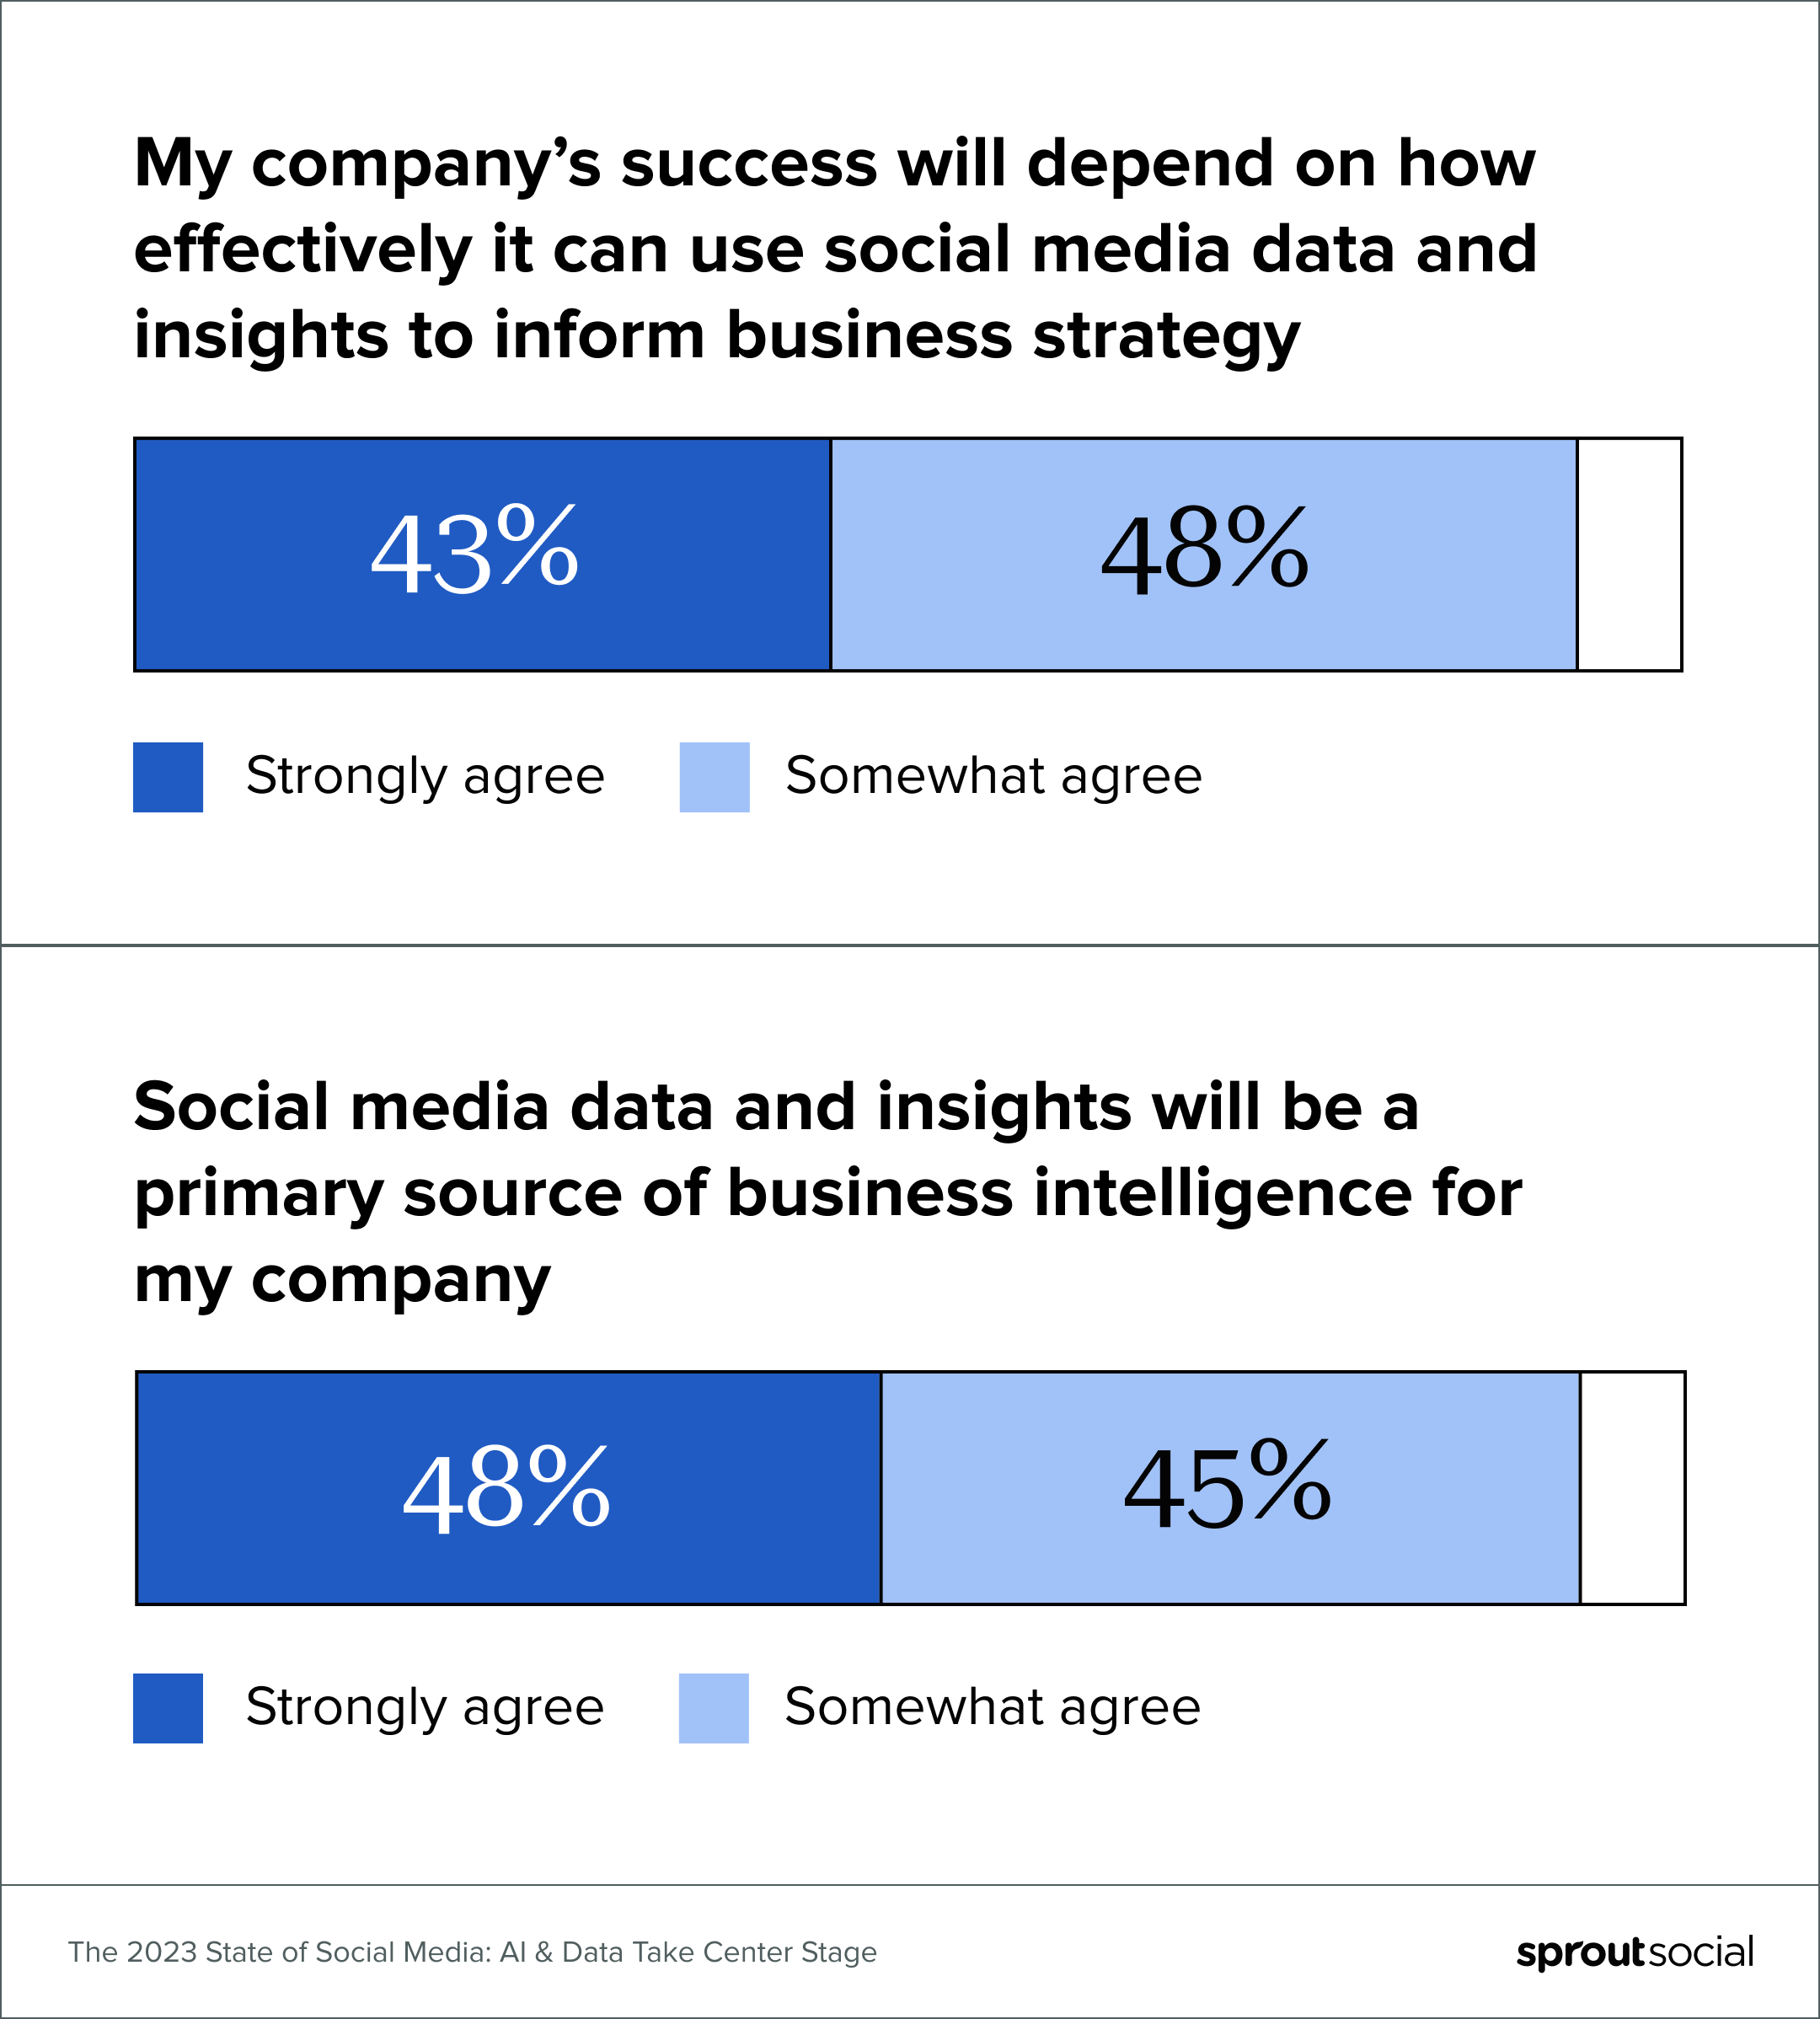 A data visualization that states 91% of business leaders agree their company's success depends on how effectively it can use social insights to inform business strategy, and 93% agree social media data and insights will be a primary source of business intelligence for their company. 